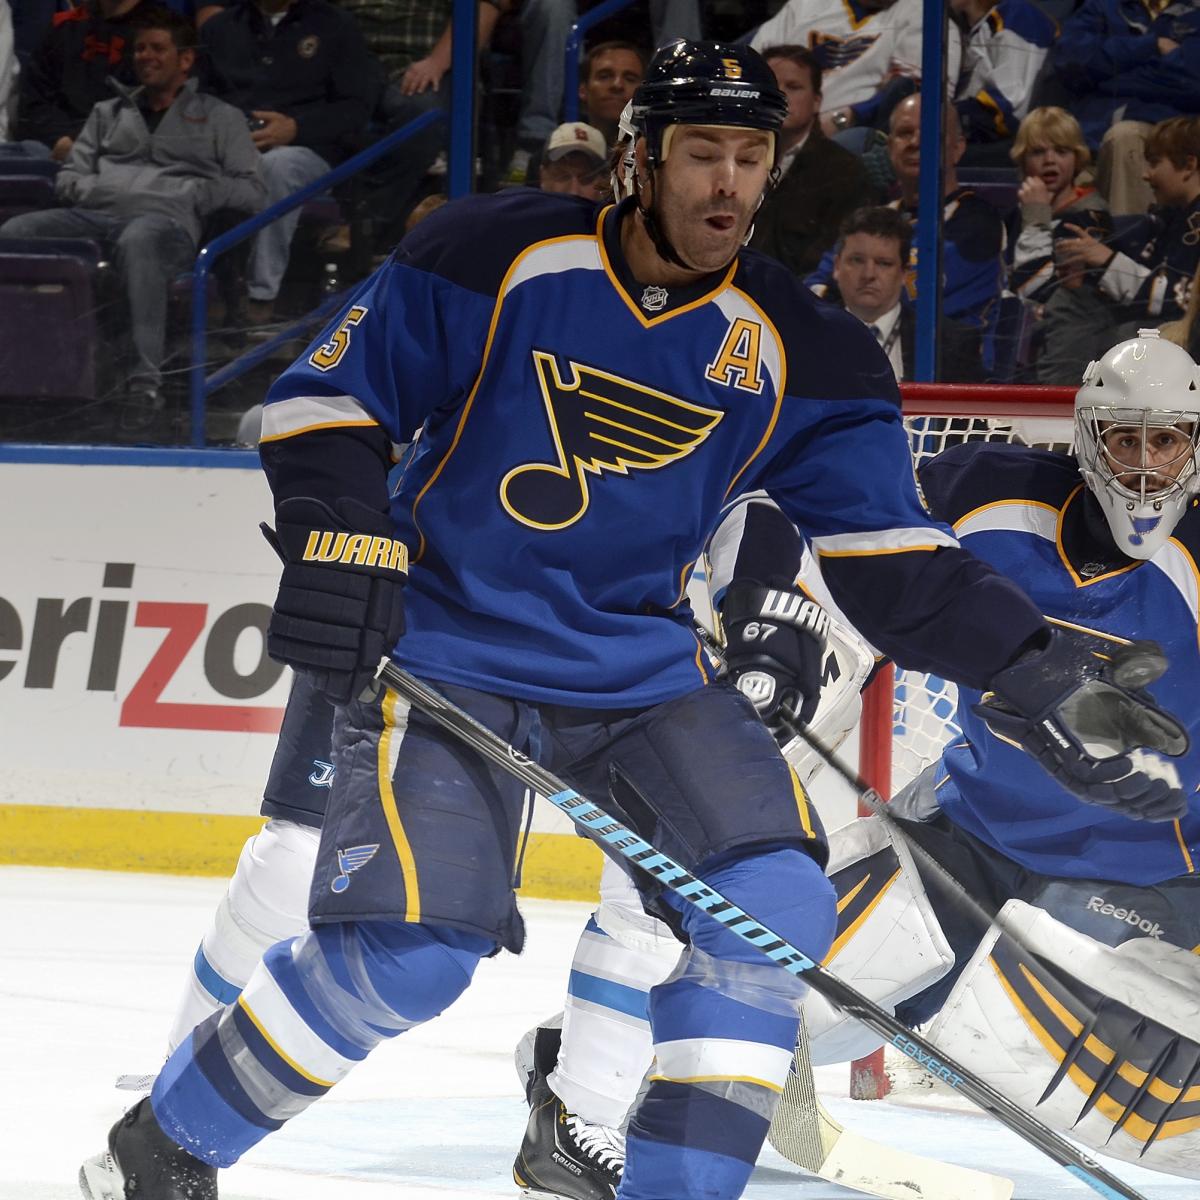 Hochman: St. Louis City SC is the anti-St. Louis Blues with its